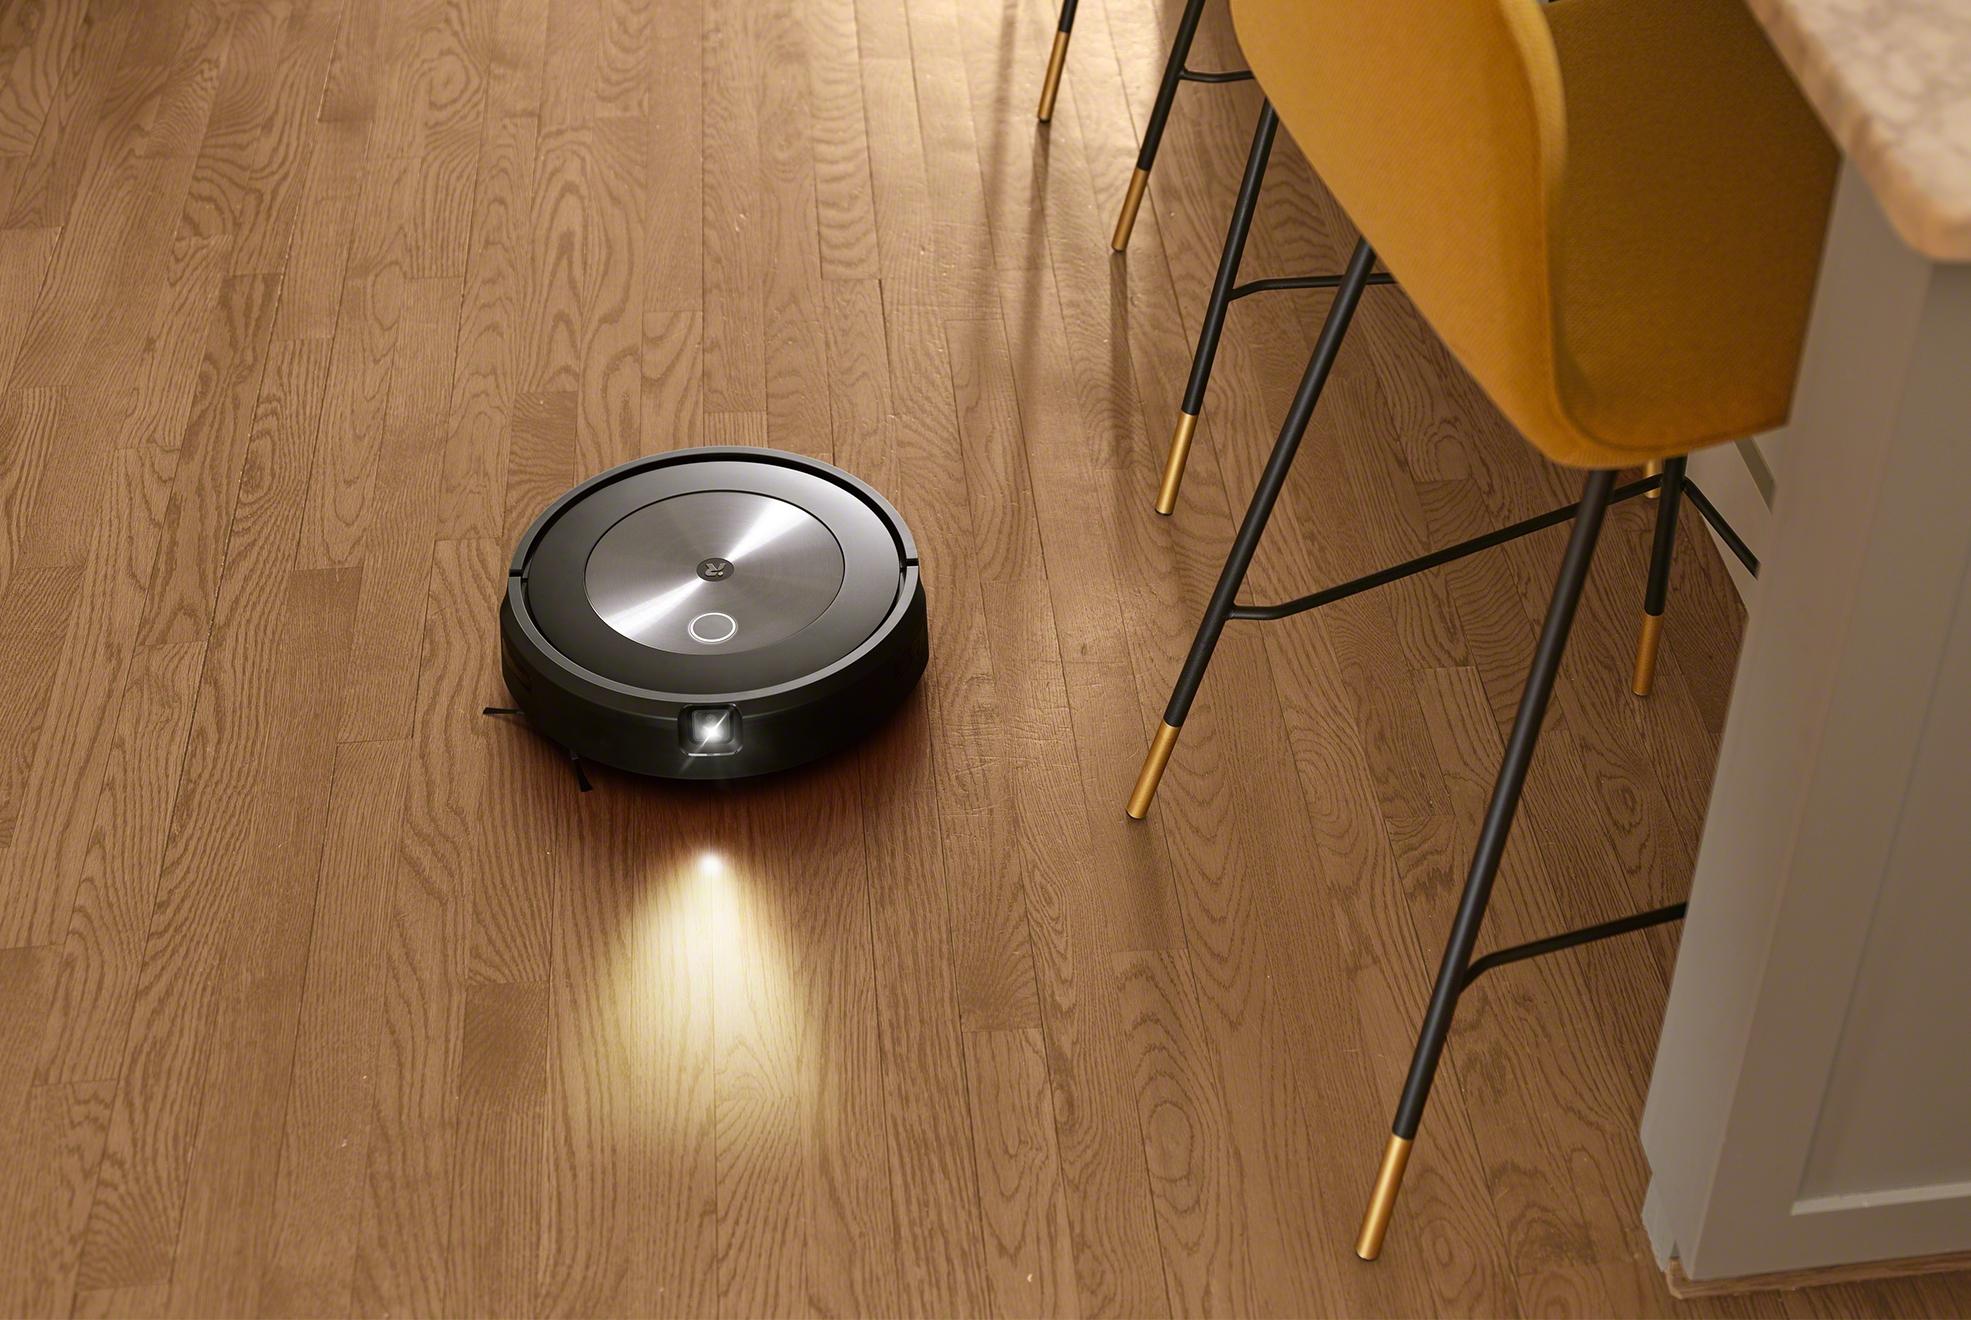 With New Roomba j7, iRobot Wants to Understand Our Homes - IEEE Spectrum